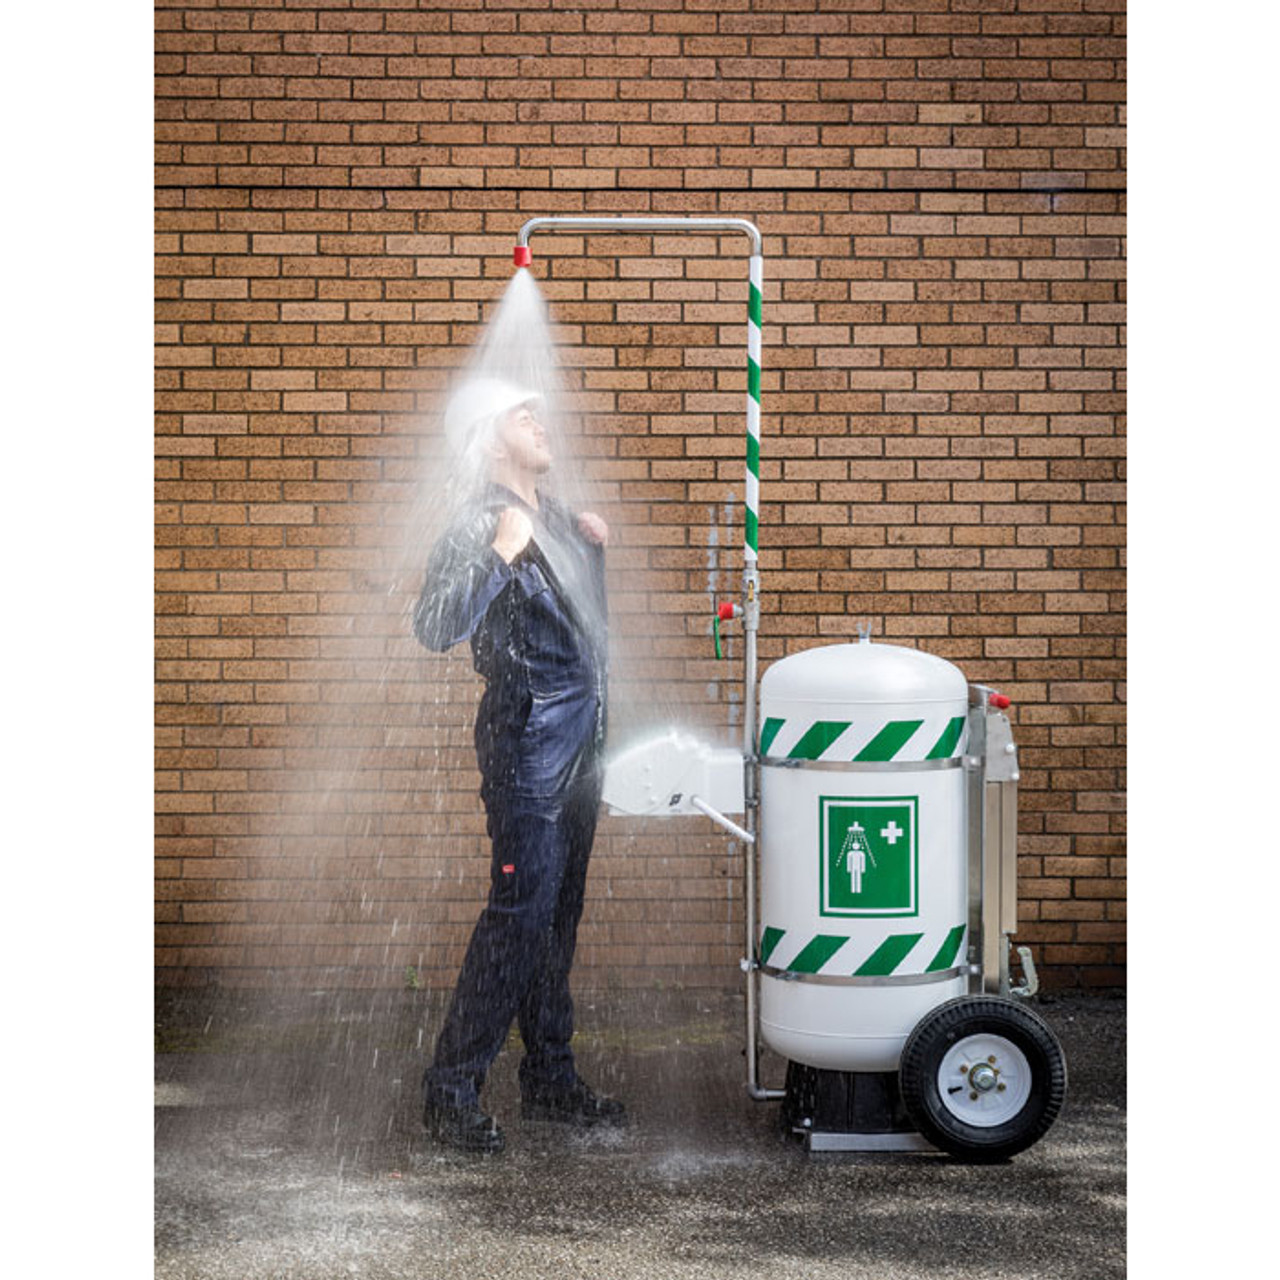 Mobile Hand Washing Station from Hughes Safety Showers